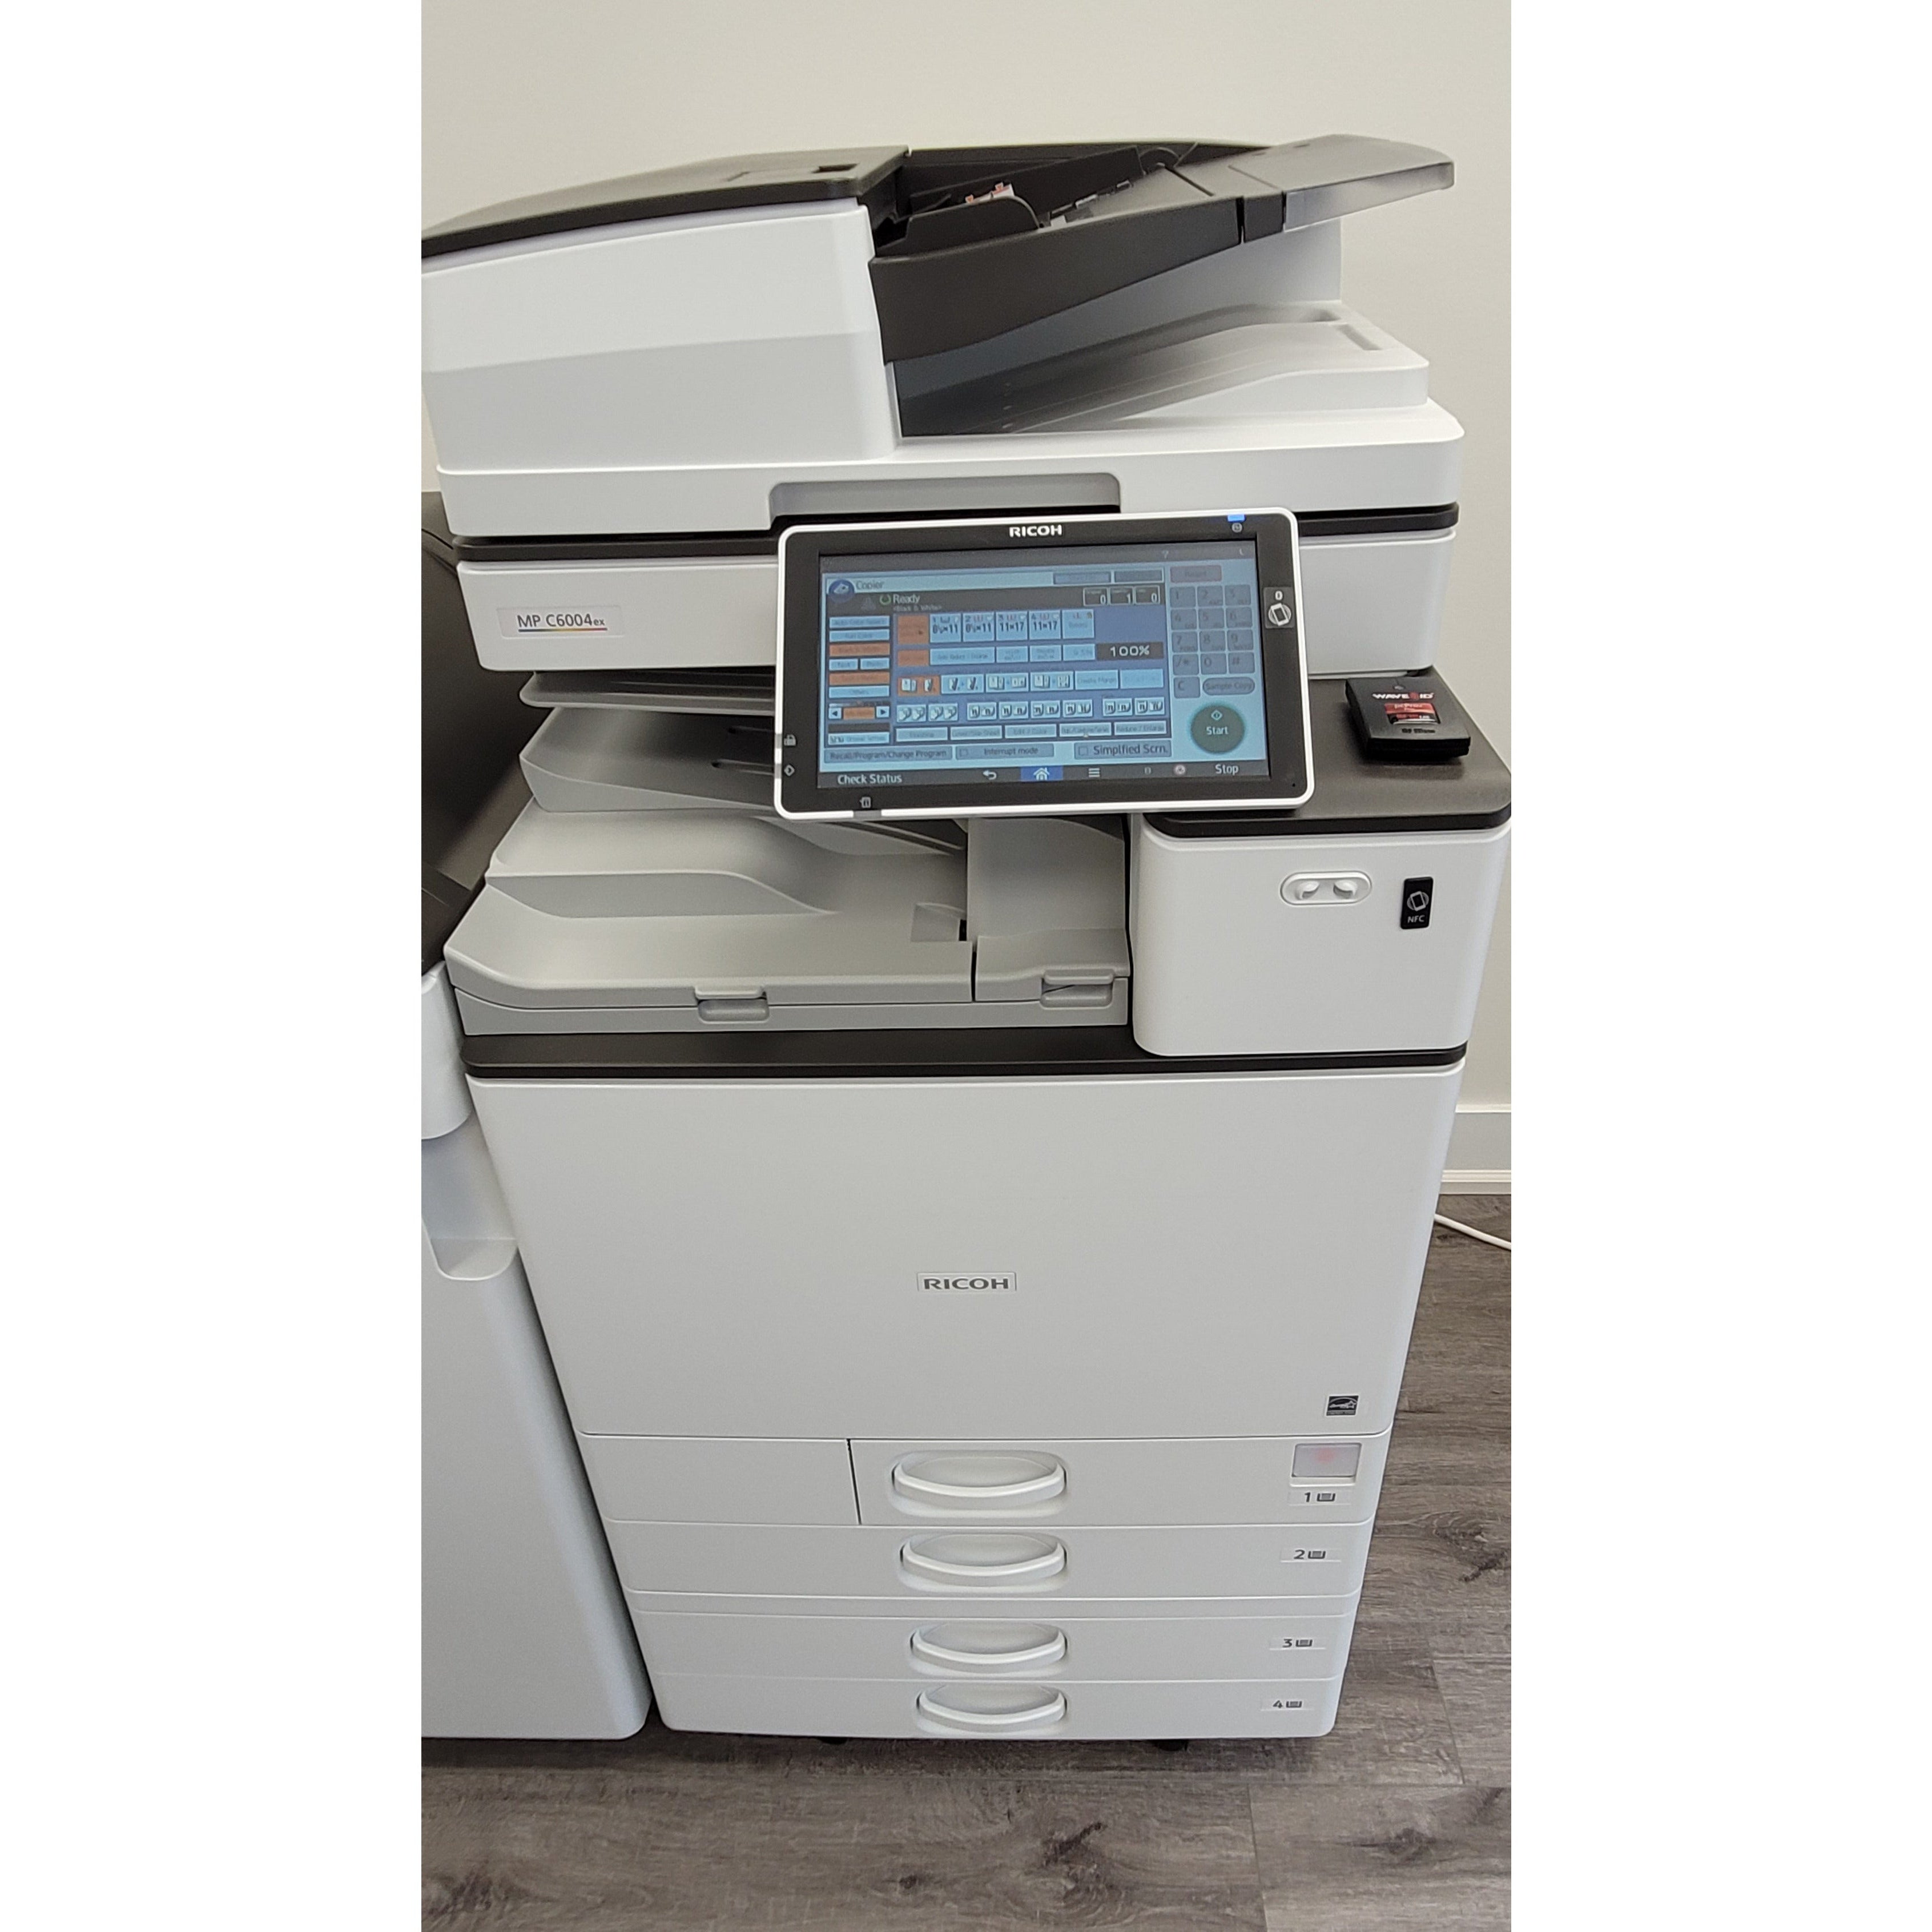 Pre-Owned Ricoh MP C6004EX Multifunction Color Laser Printer 11 x 17,  12 x 18 Paper Size 4 Trays